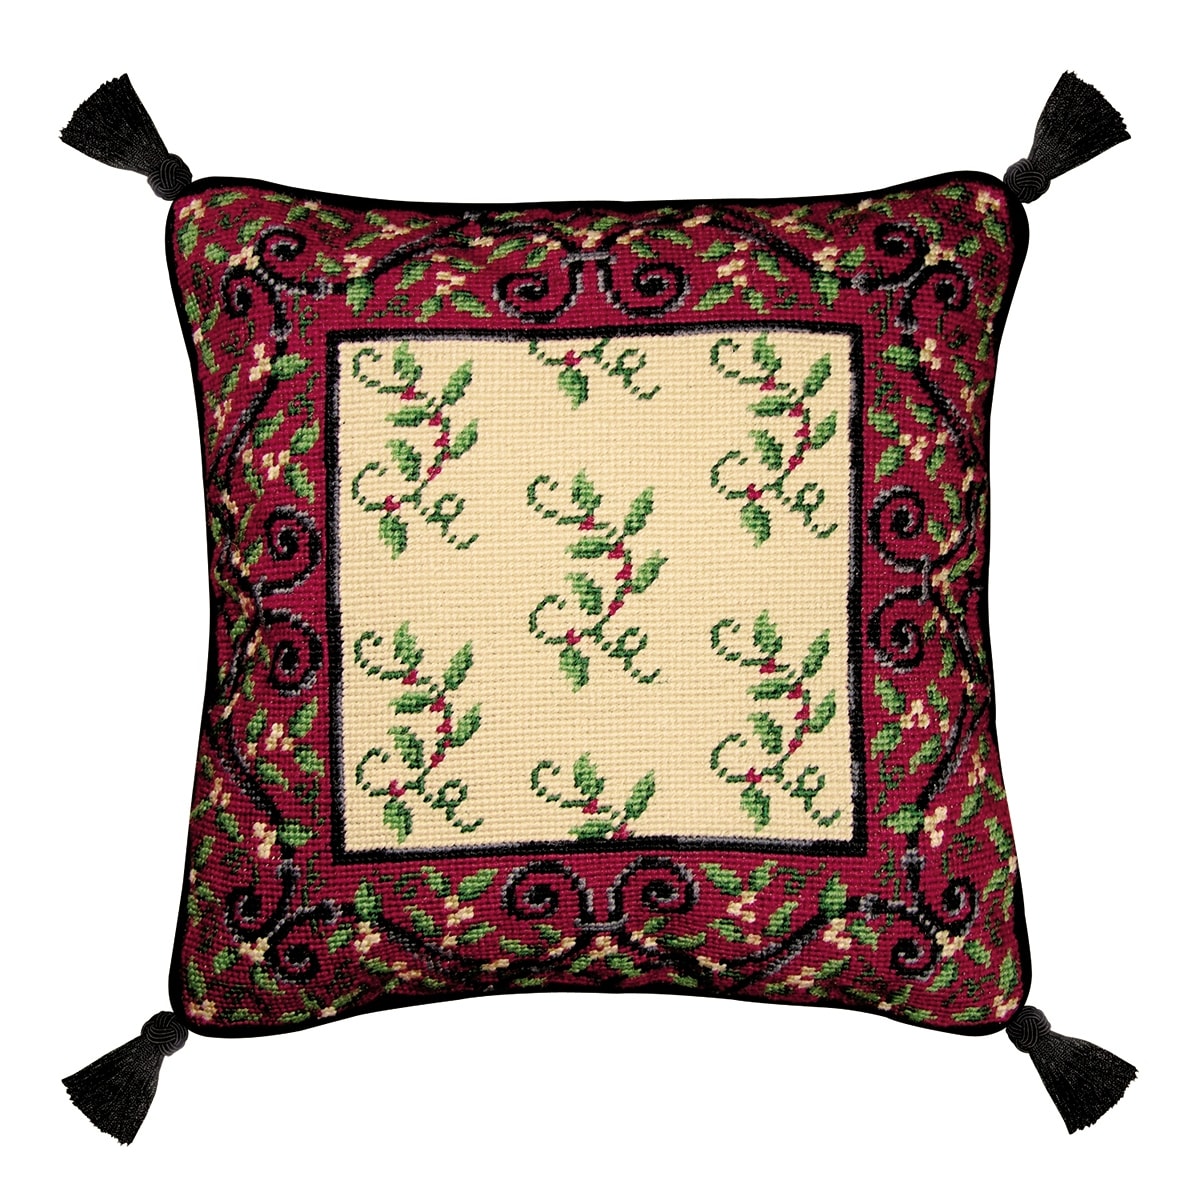 TAPESTRY #1 NEEDLEPOINT PILLOW 16 X 20